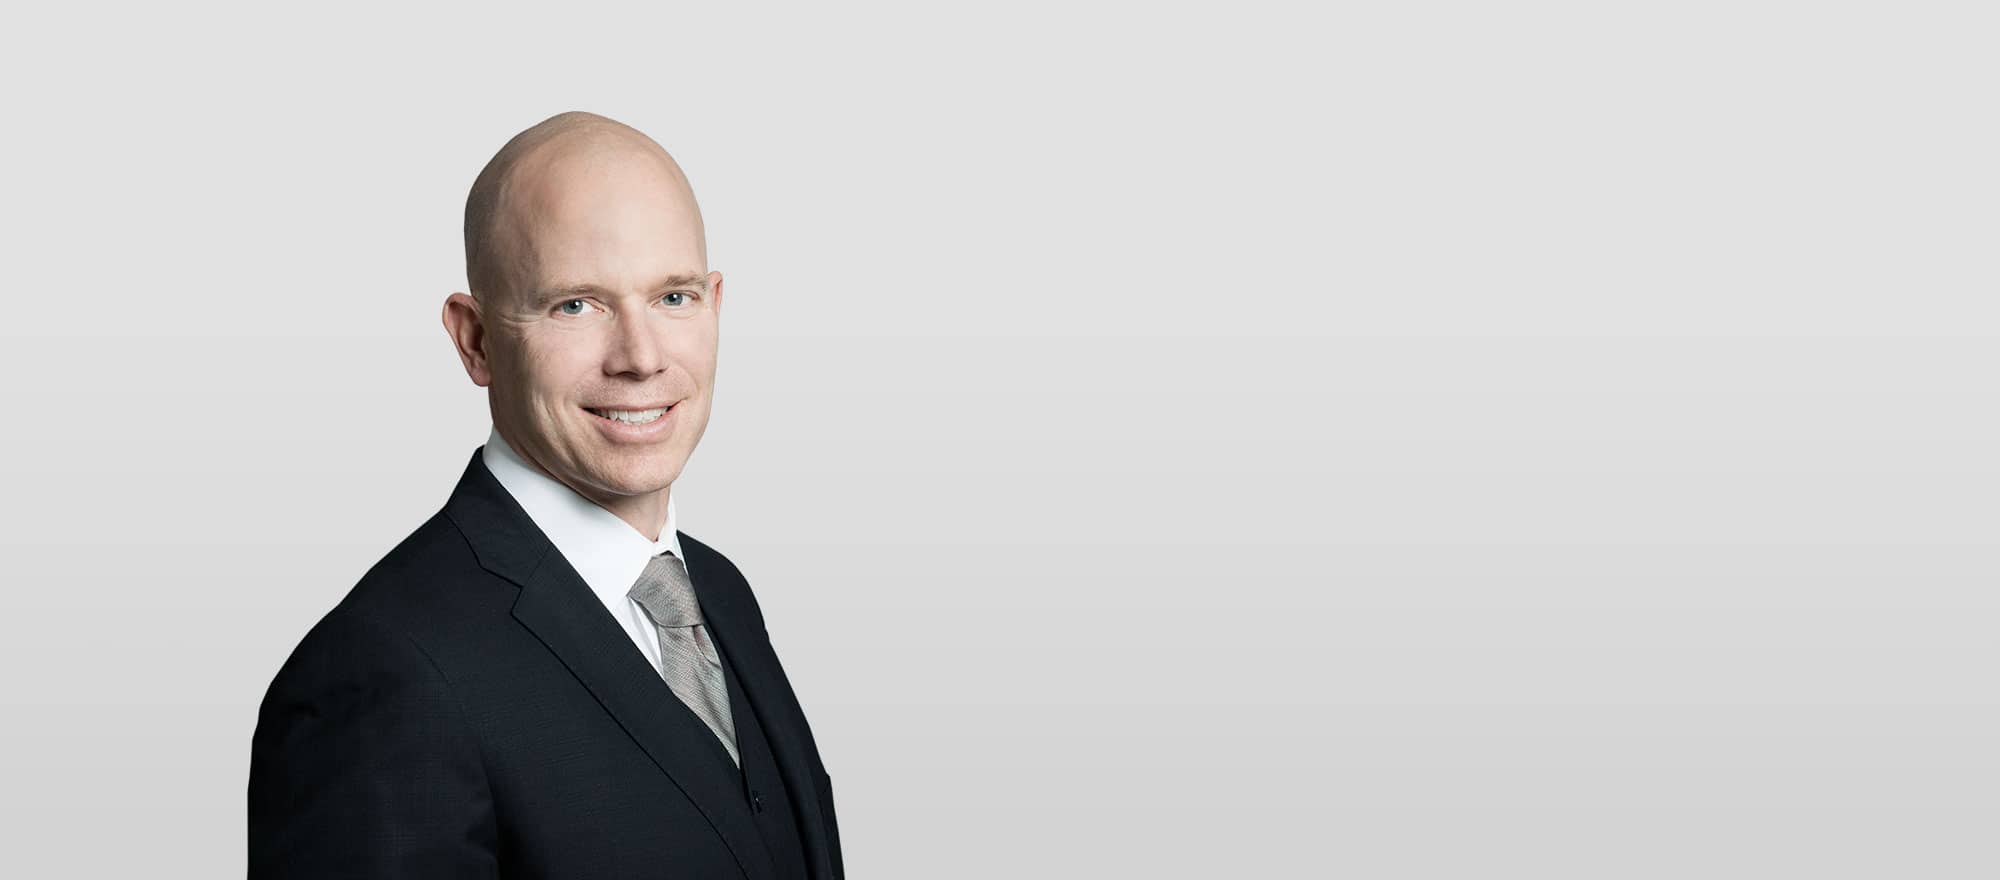 Christopher Hirst is a lawyer and managing partner at Alexander Holburn, a Vancouver law firm